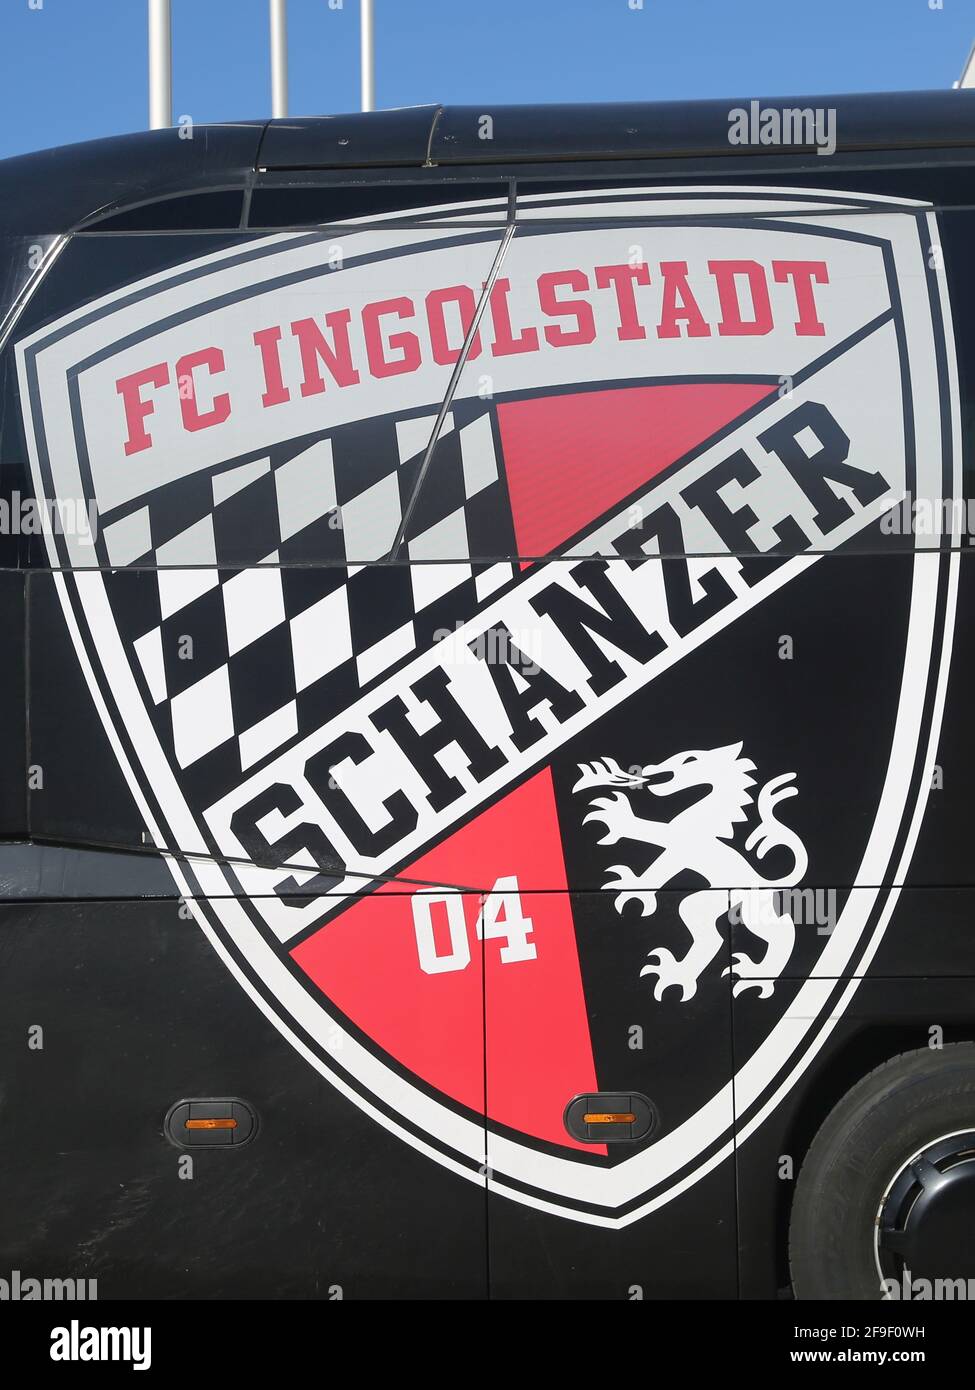 Fc Ingolstadt 04 High Resolution Stock Photography And Images Alamy